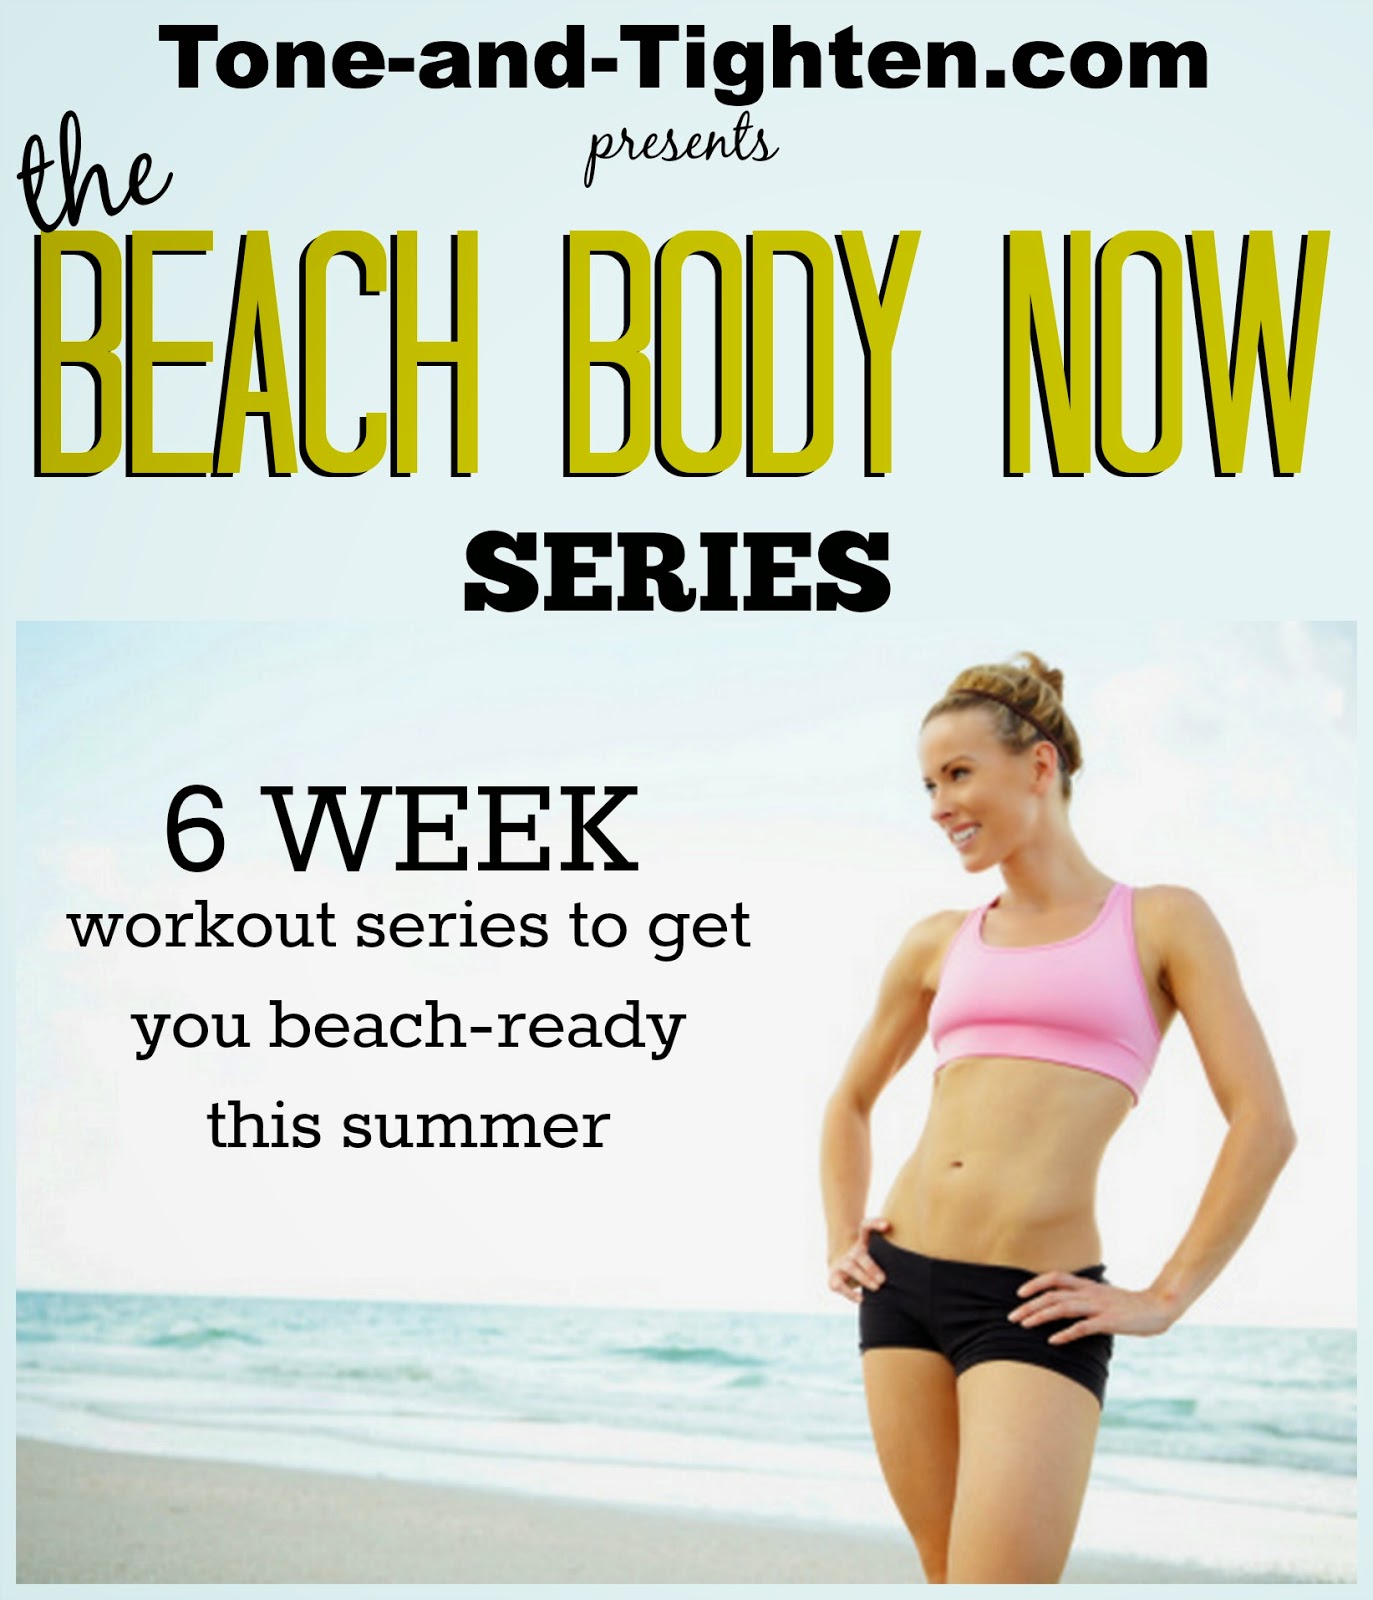 Beach Body Now Series – How to get the perfect beach body by the summer!